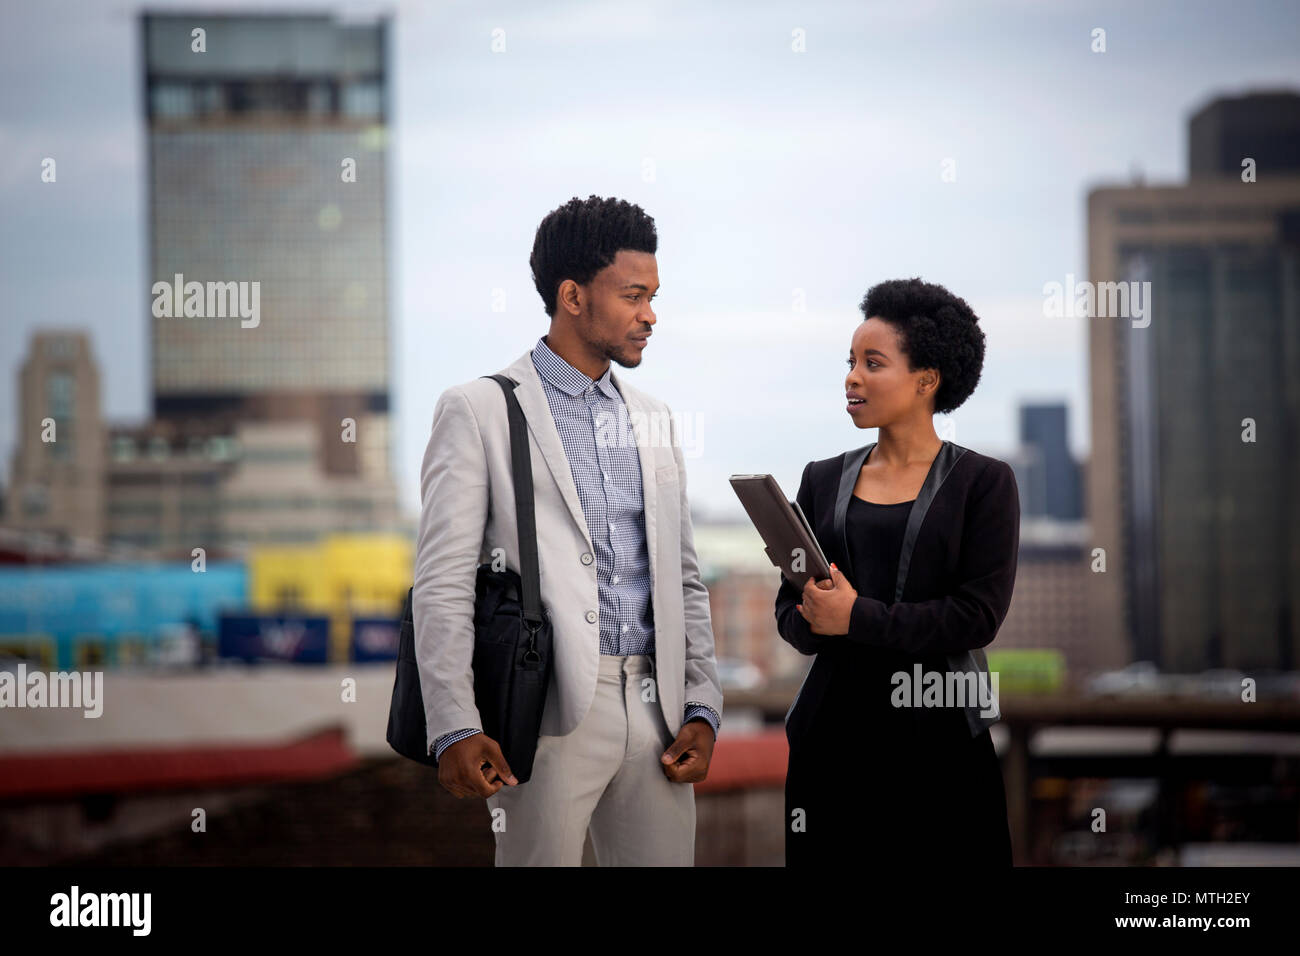 Business man and woman talking on rooftop Stock Photo